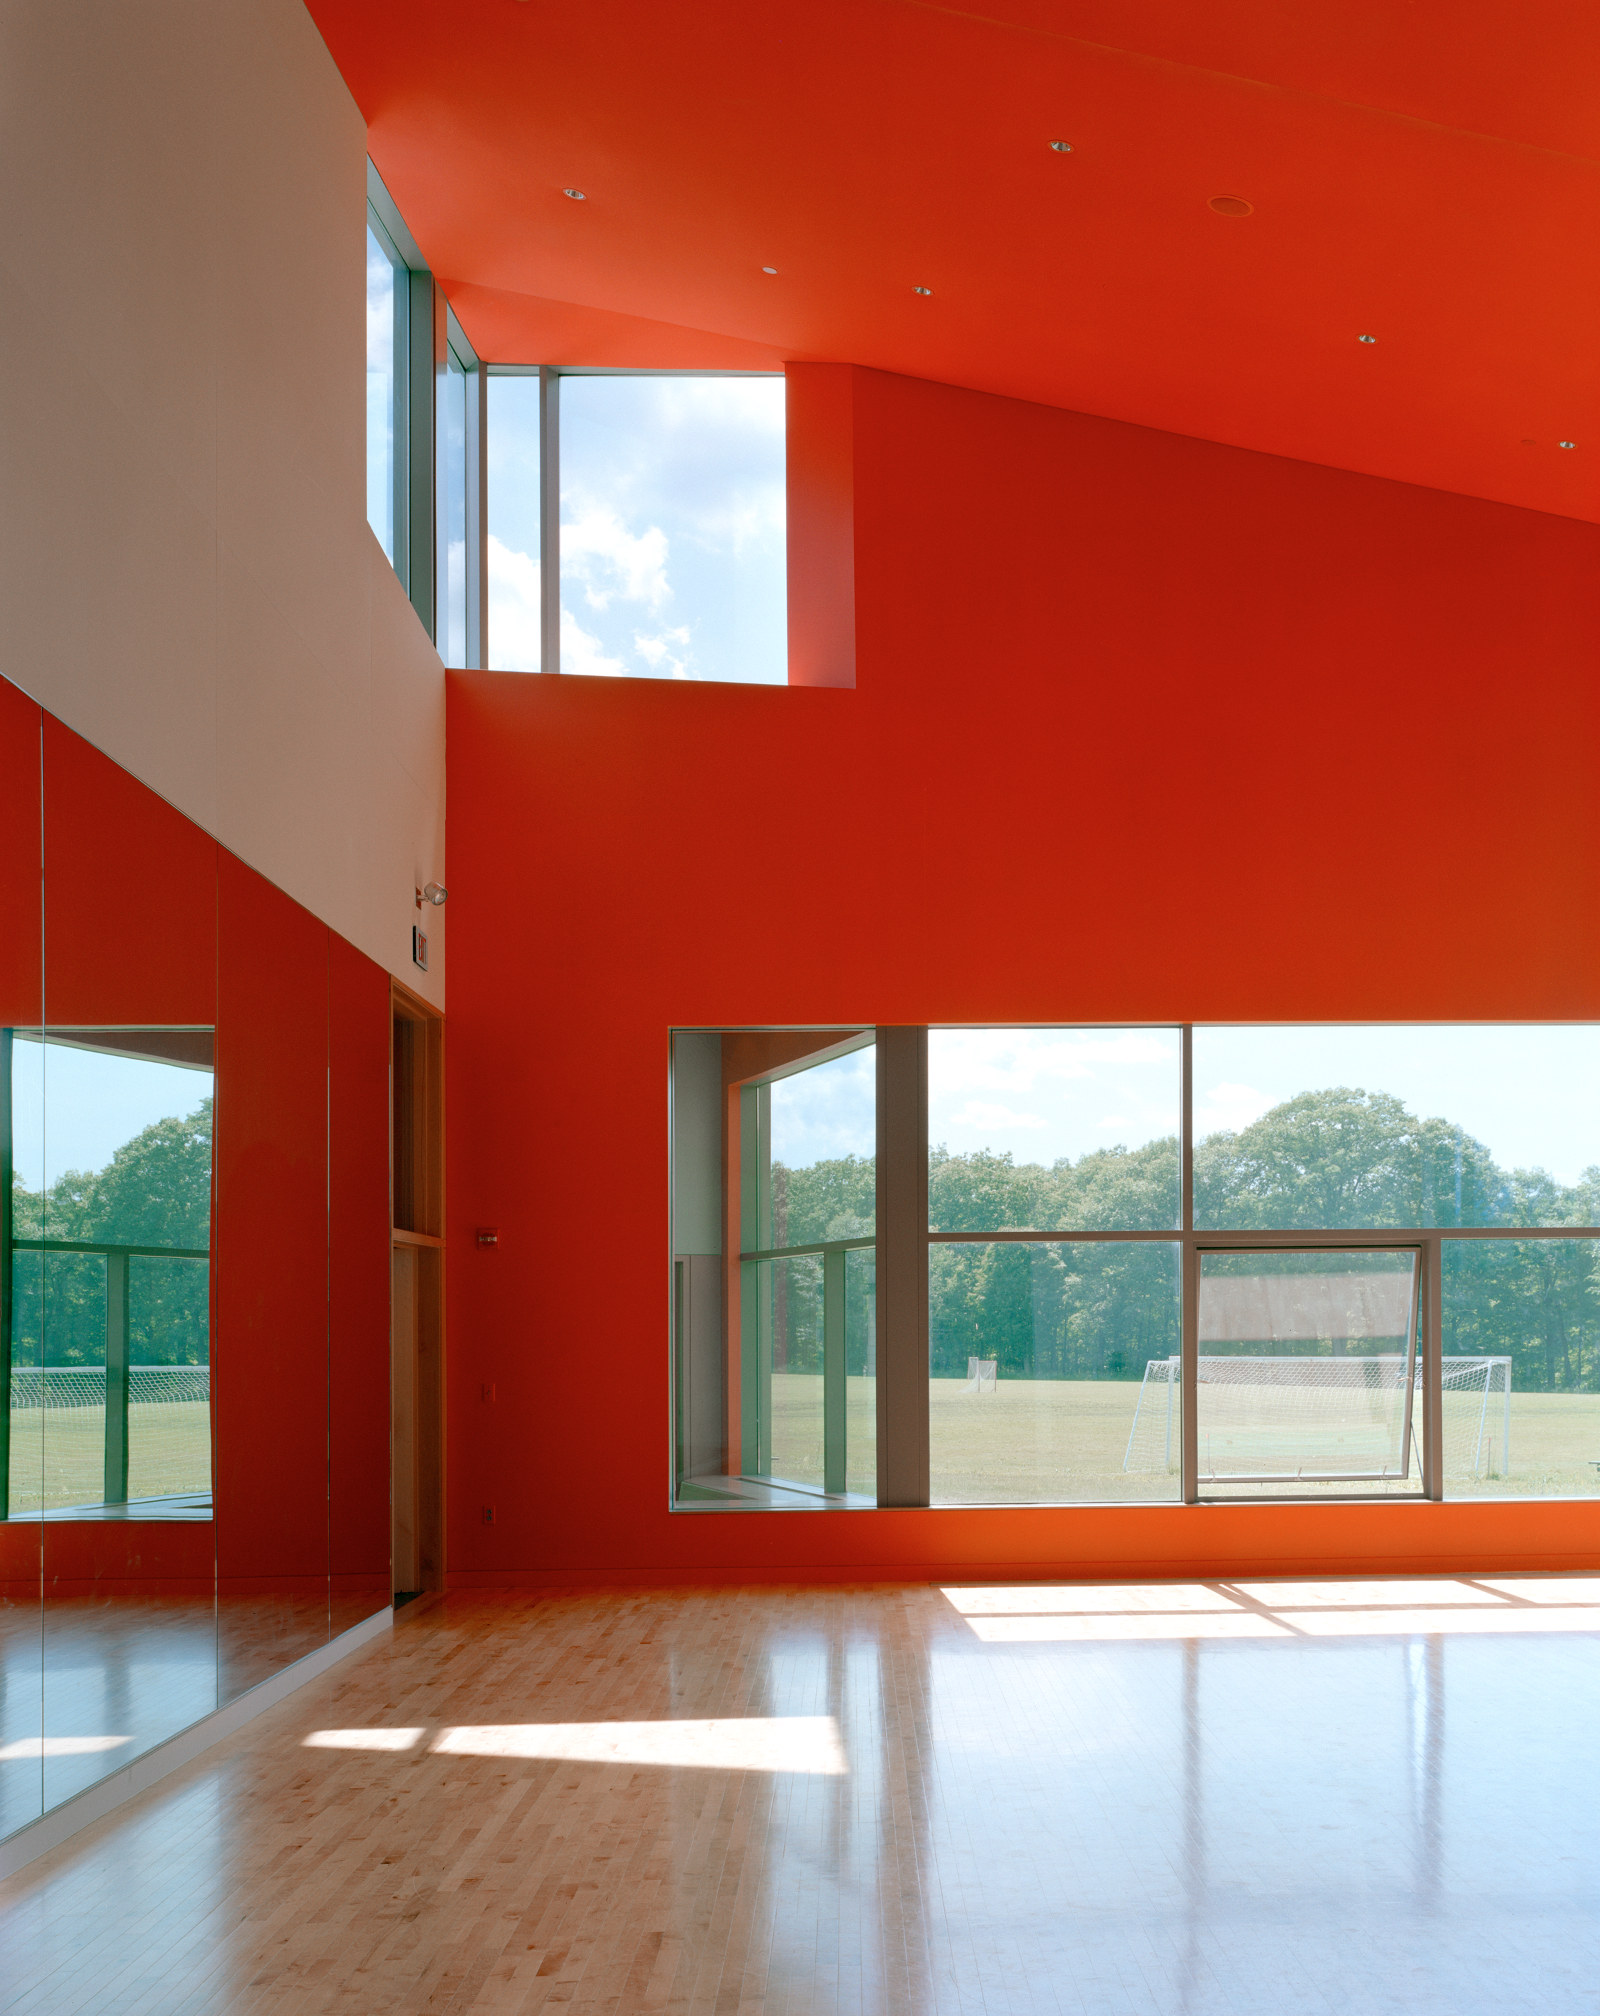 Light-filled dance studio with red walls, at The Putney School.